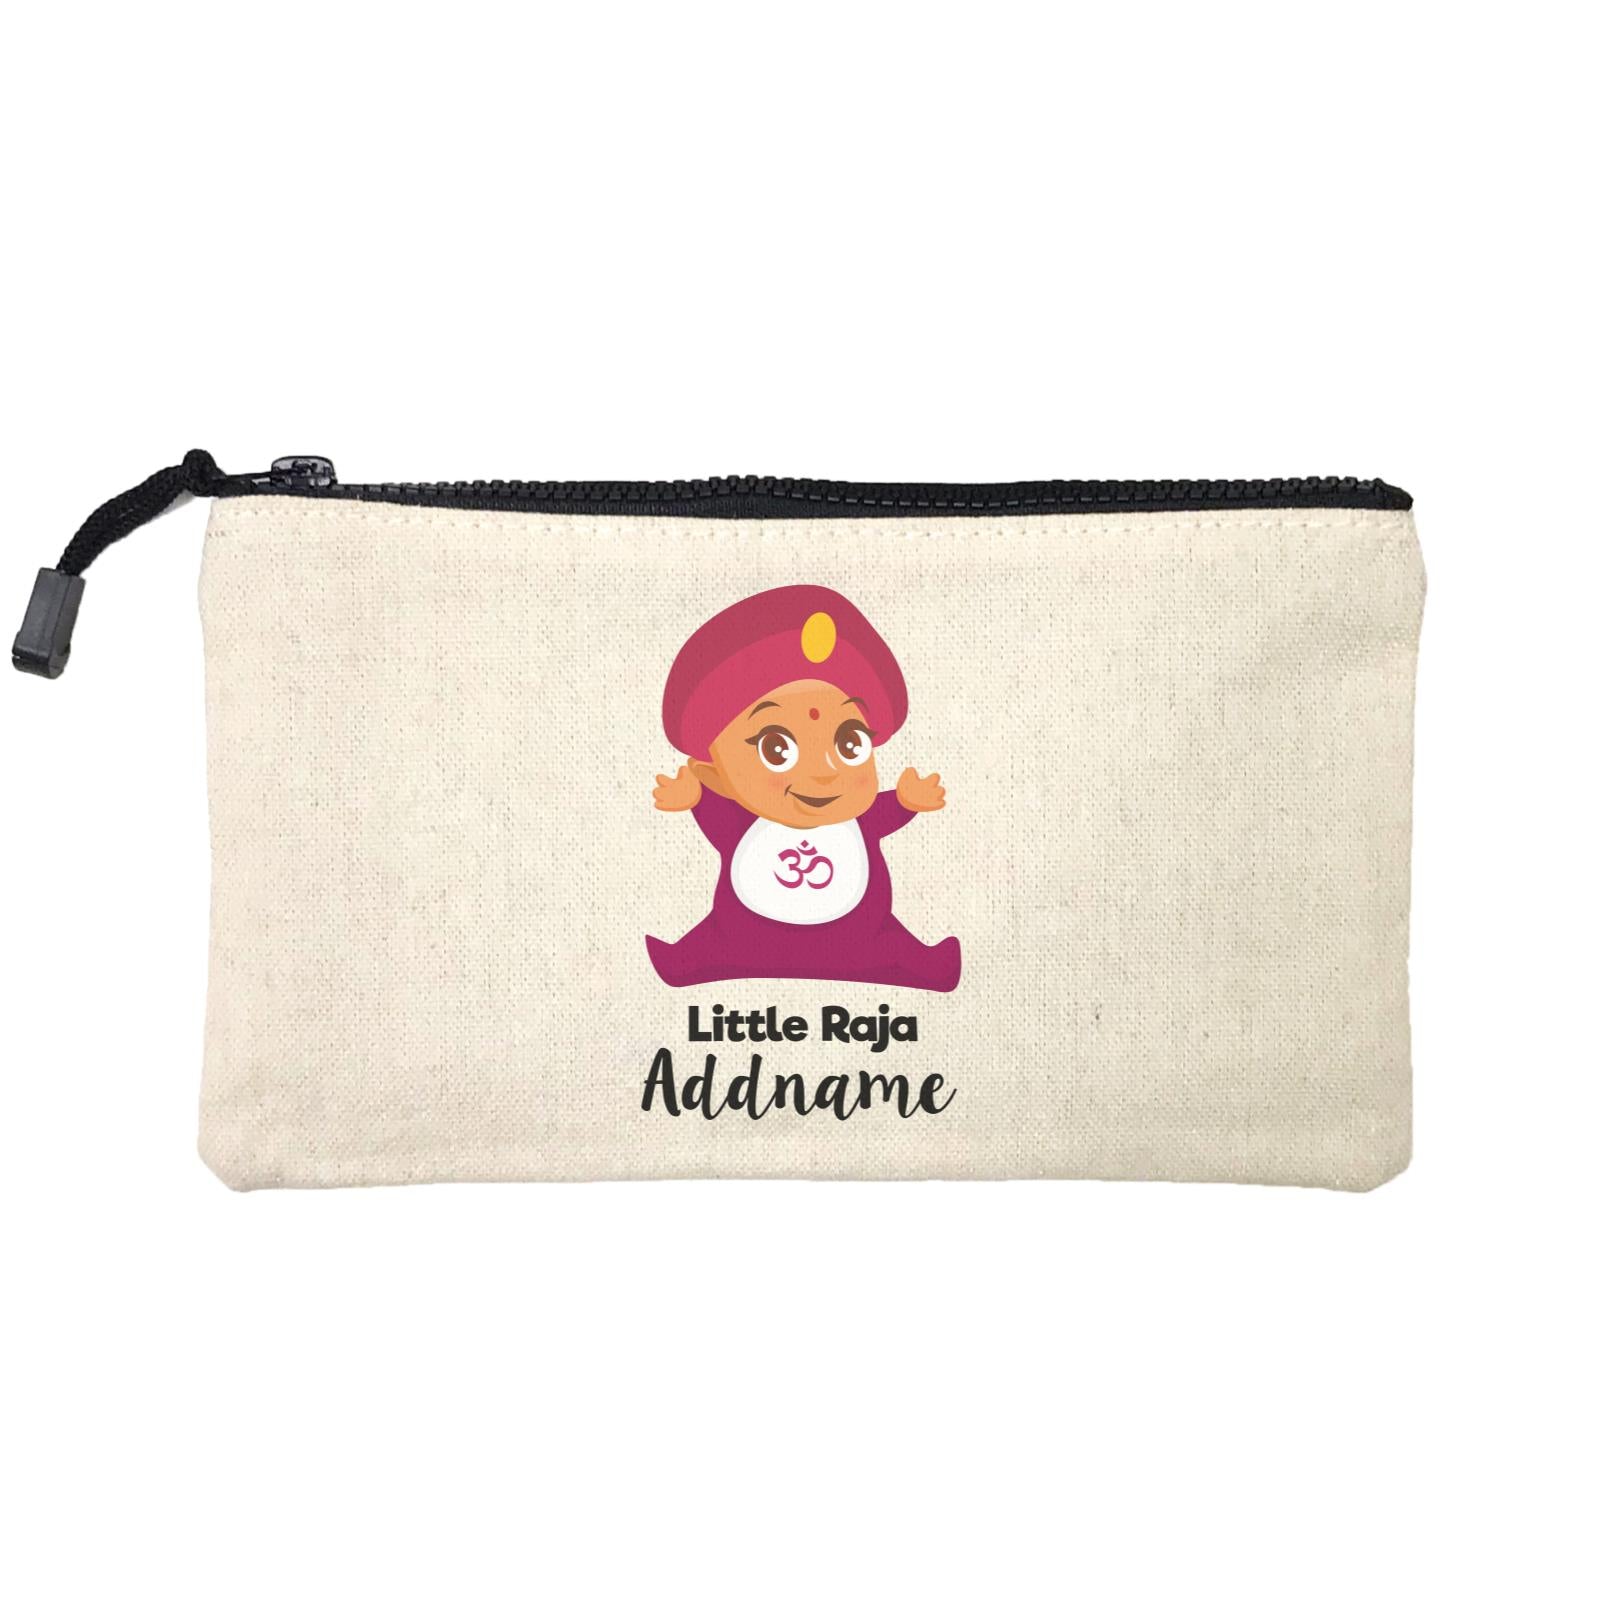 Little Raja Baby Addname Mini Accessories Stationery Pouch